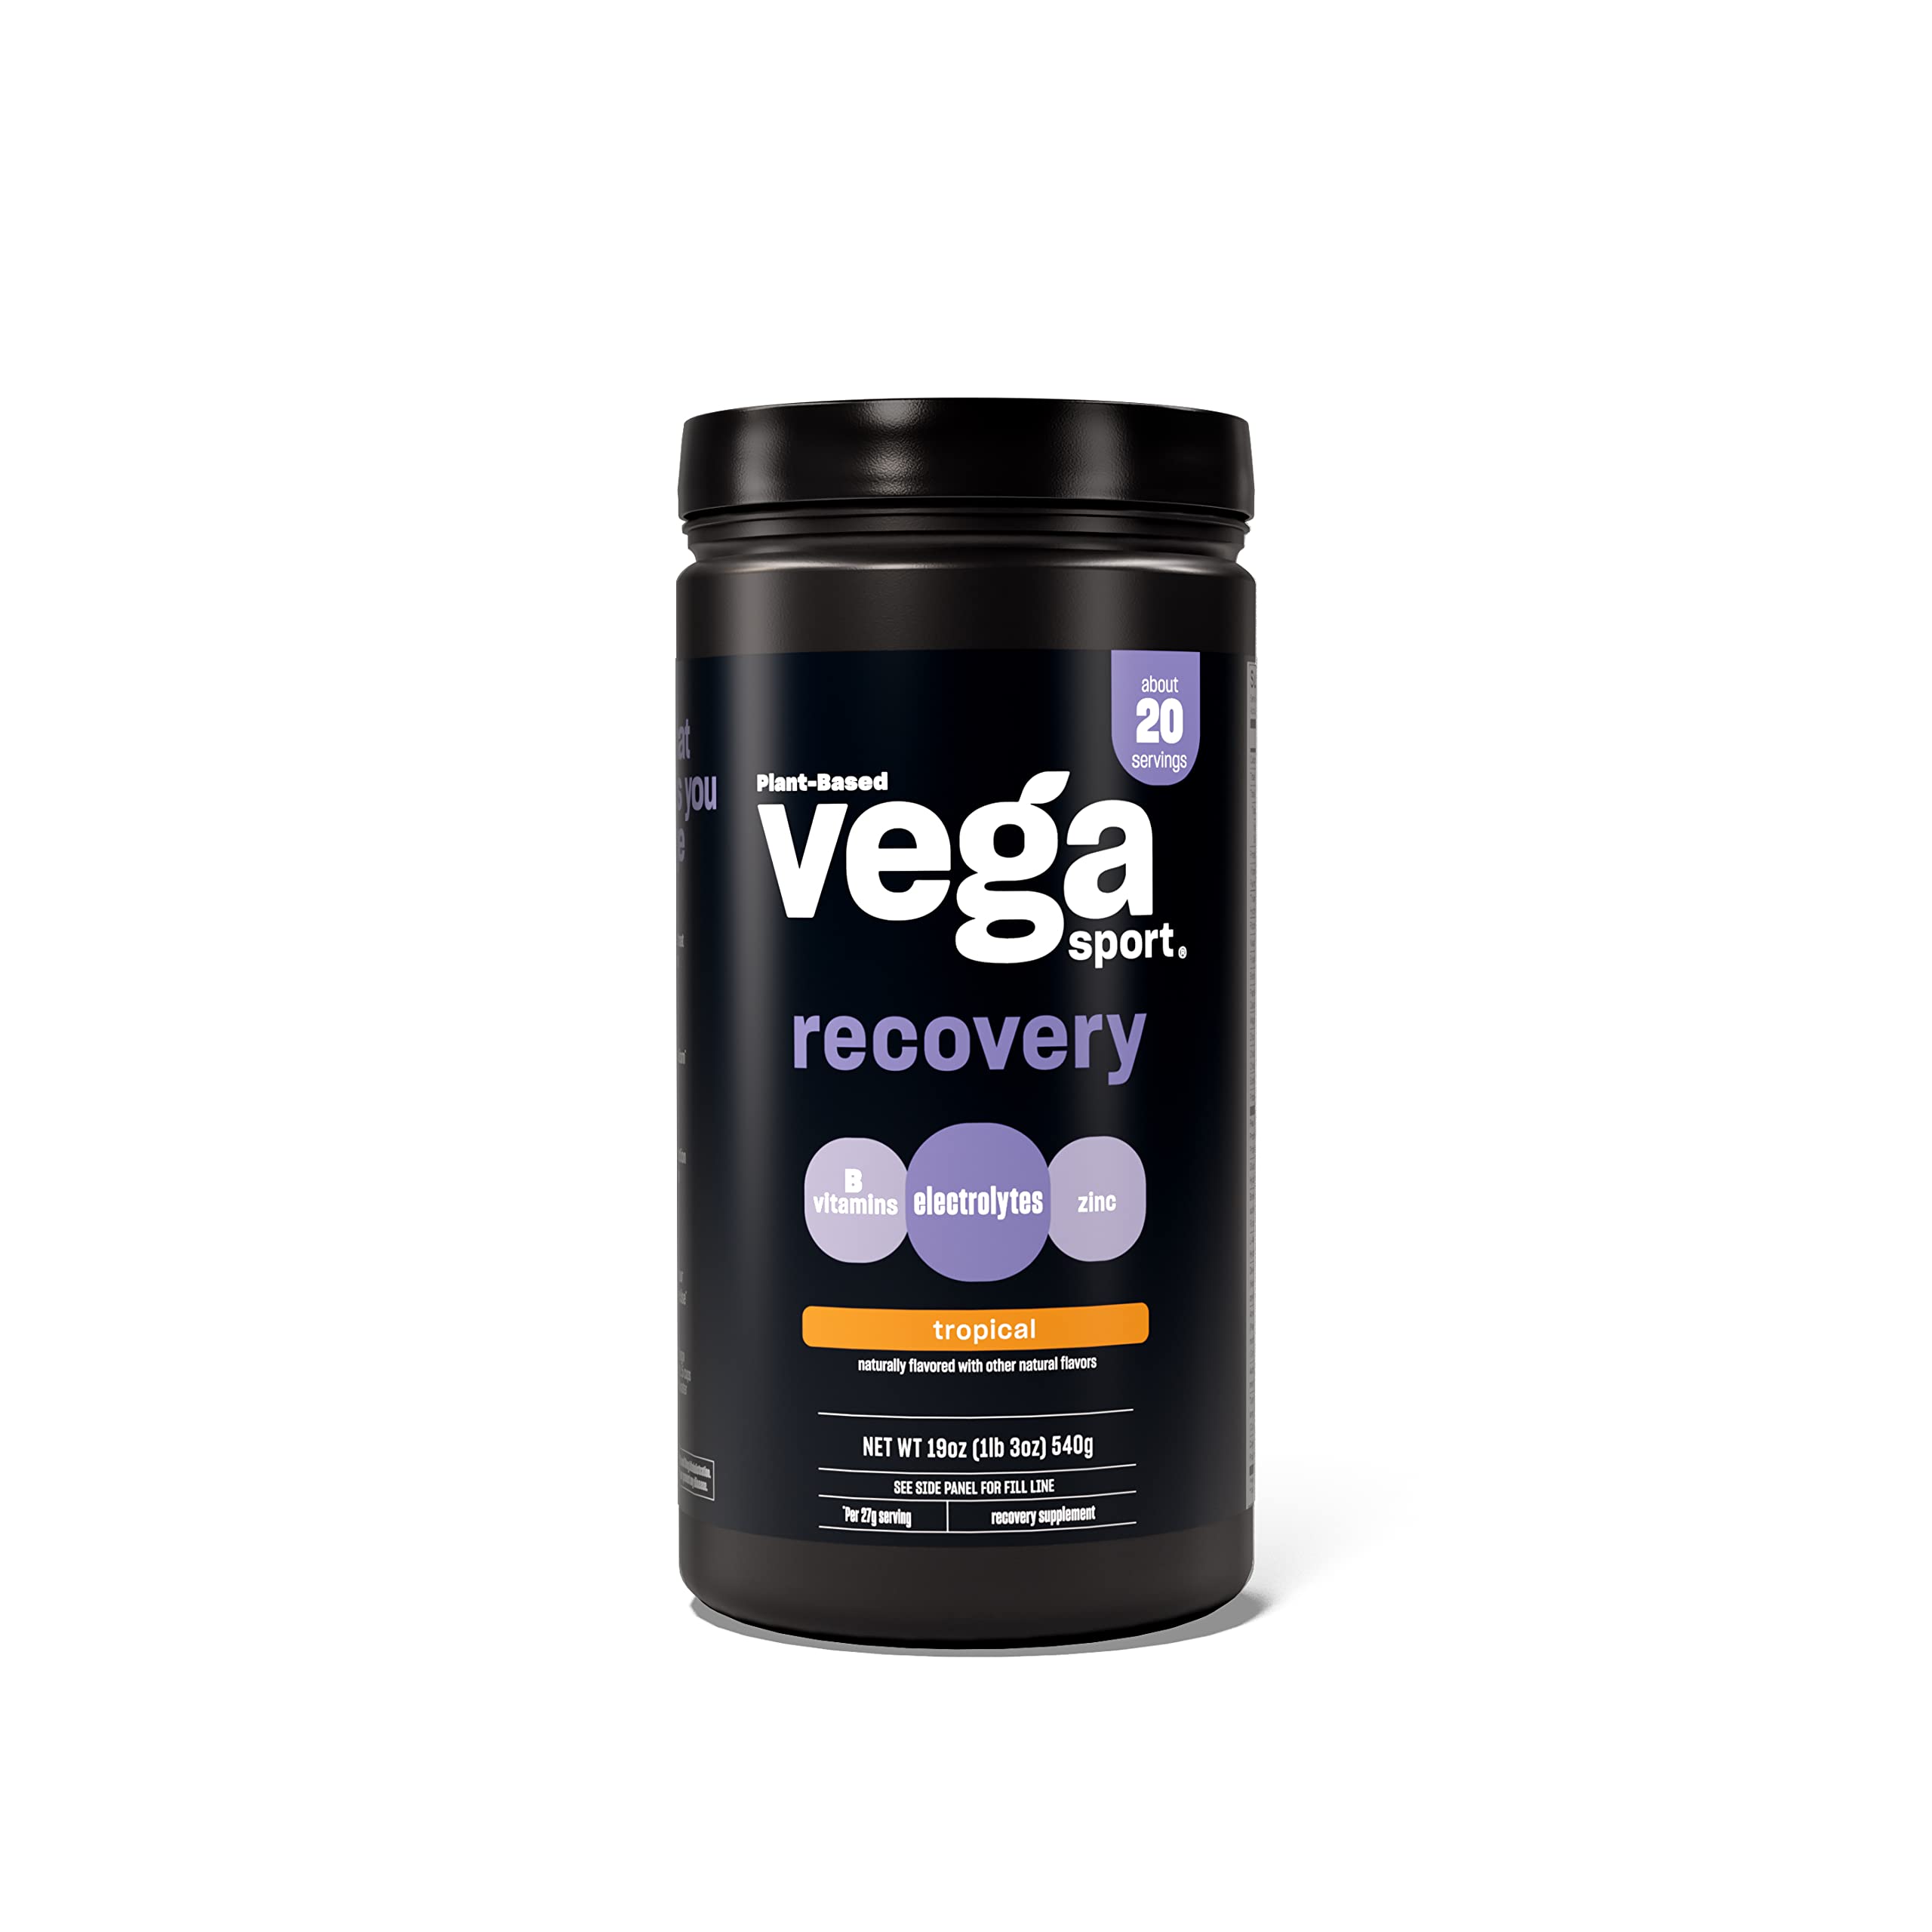 Vega Sport Recovery Tropical (20 Servings) Post Workout Recovery Drink for Women and Men, Electrolytes, Carbohydrates, B-Vitamins, Vitamin C and Protein, Vegan, Gluten Free, Dairy Free, 1.2lbs